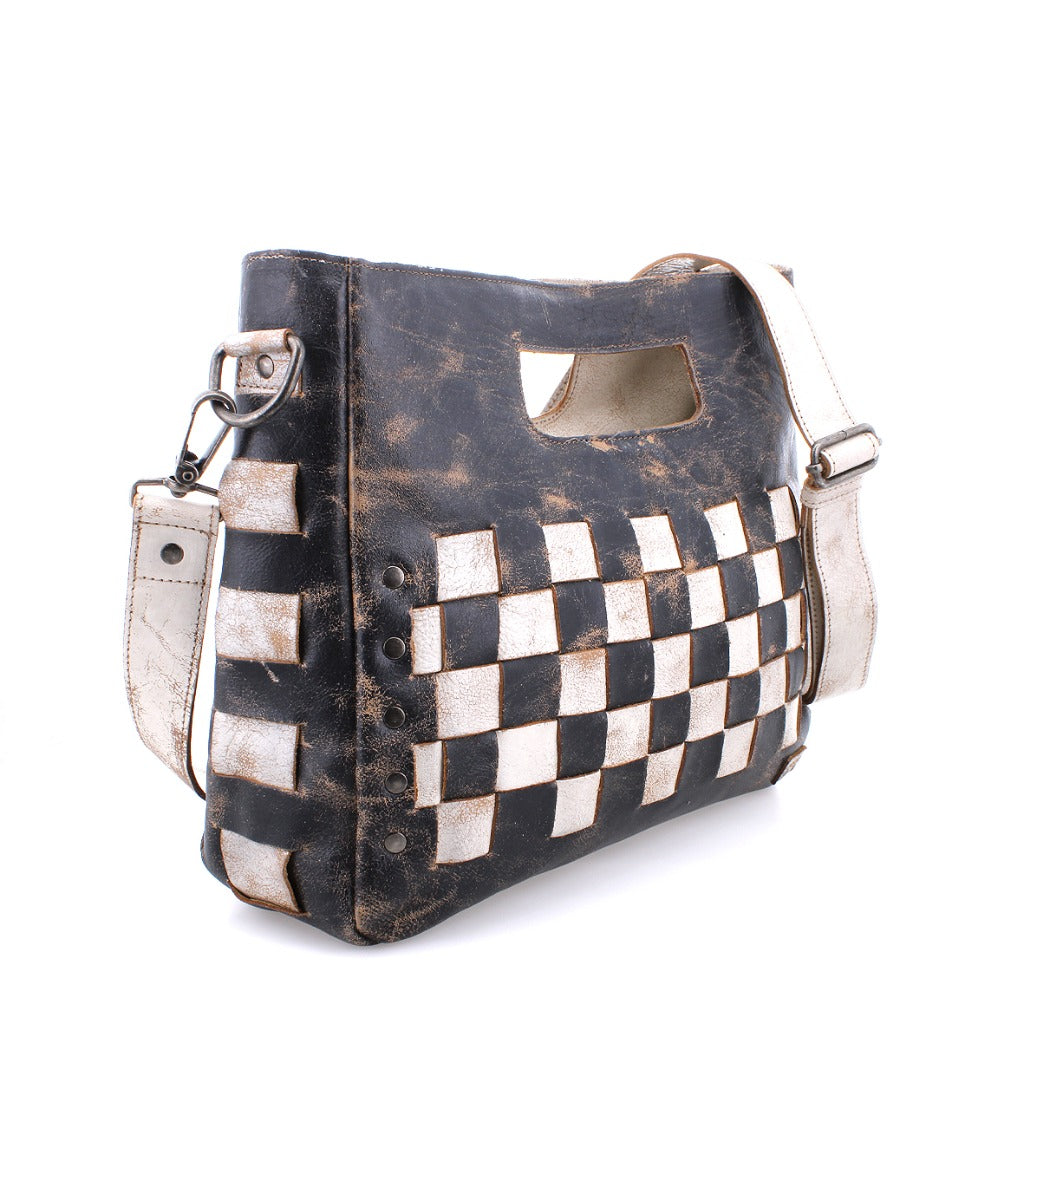 A distressed black and white leather Orchid bag with a checkered pattern by Bed Stu.